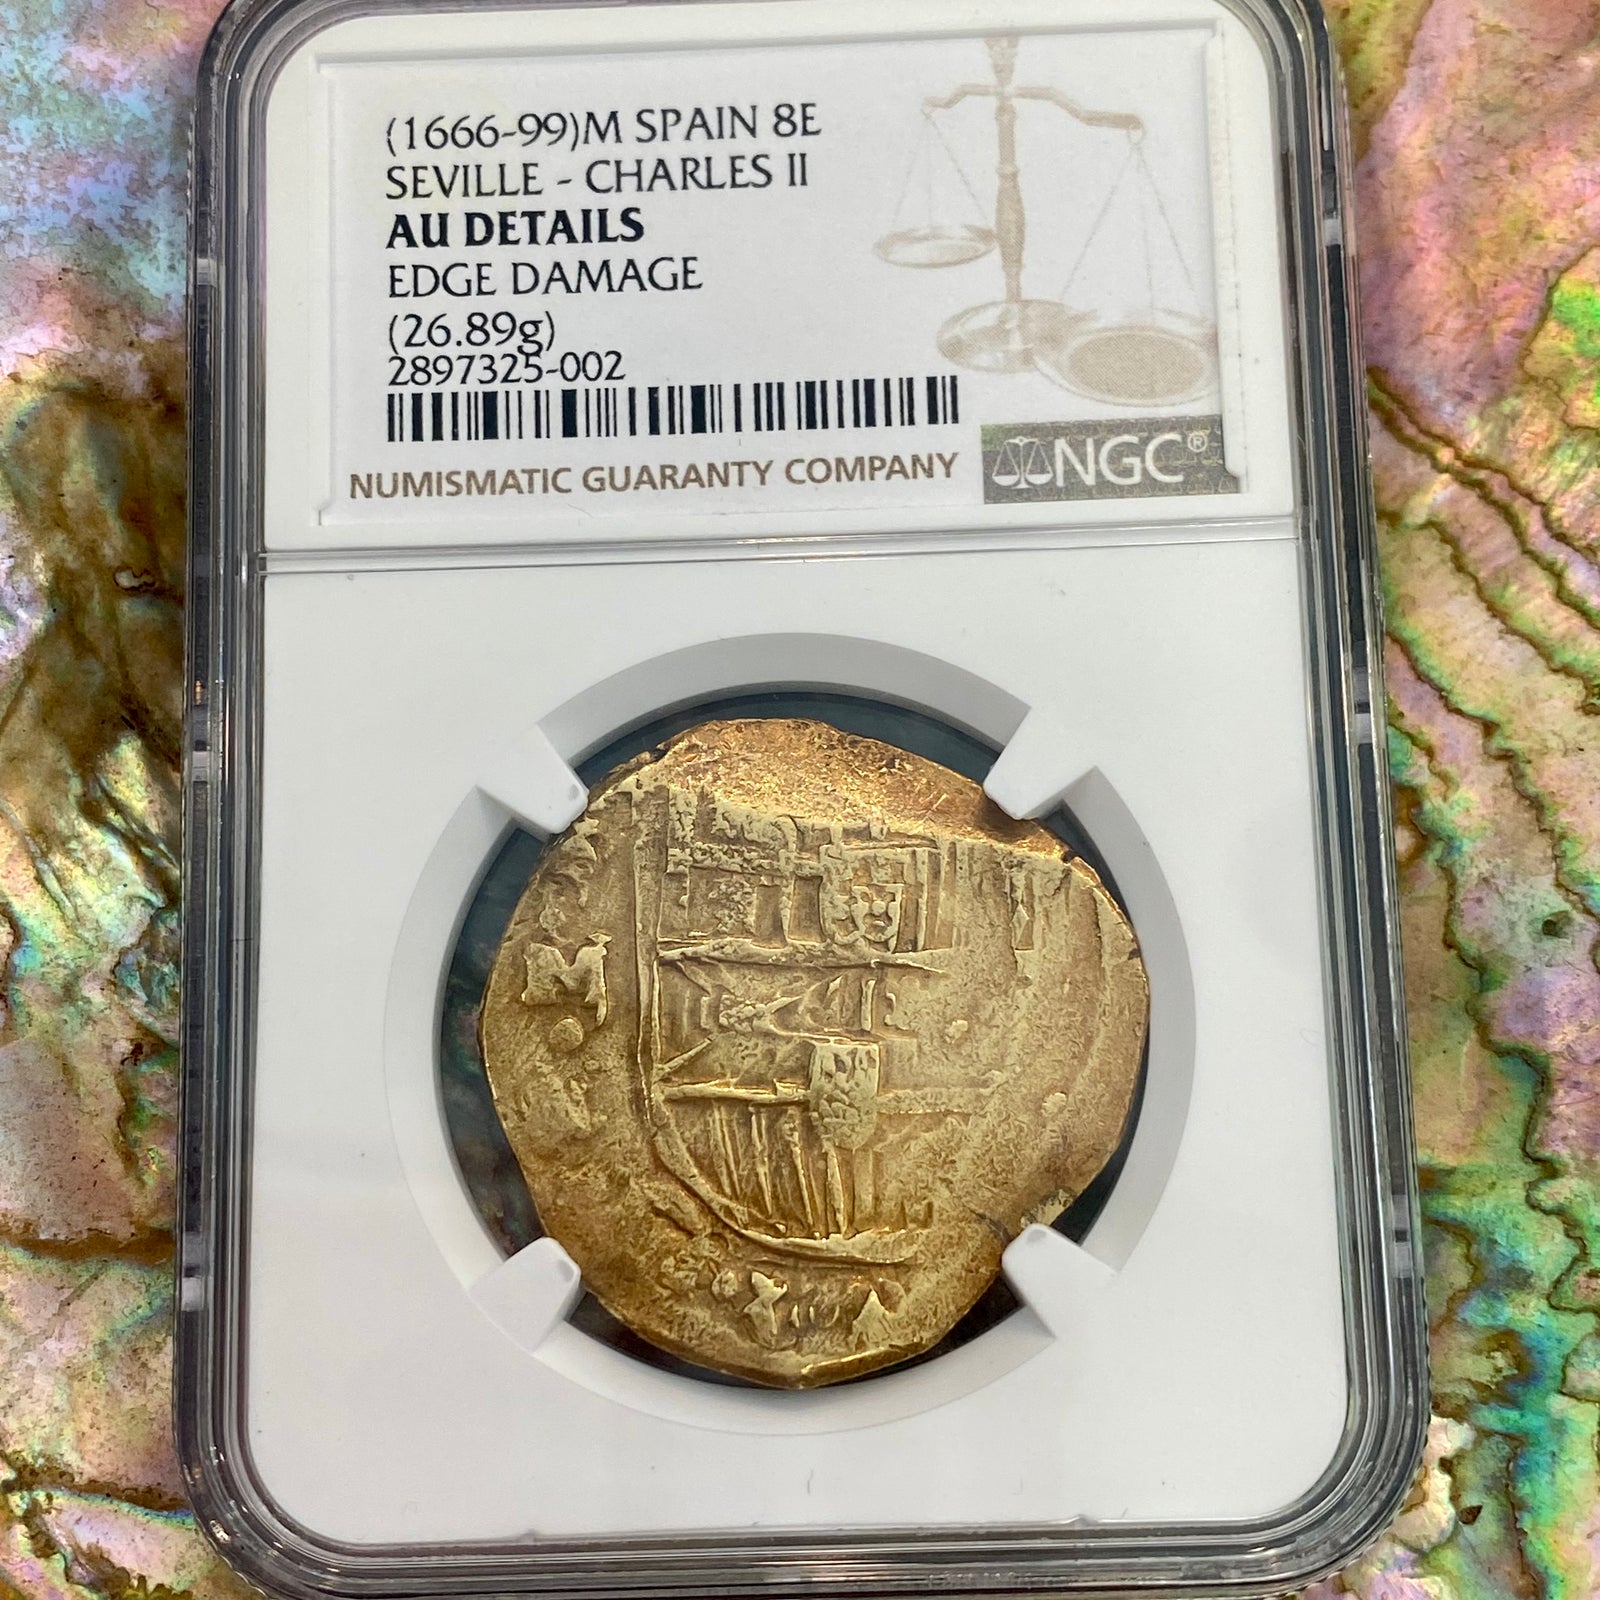 Authentic 2 Escudos Cob - Minted in Seville, Spain - Grade NGC AU 53 - -  Shipwreck Treasures of the Keys